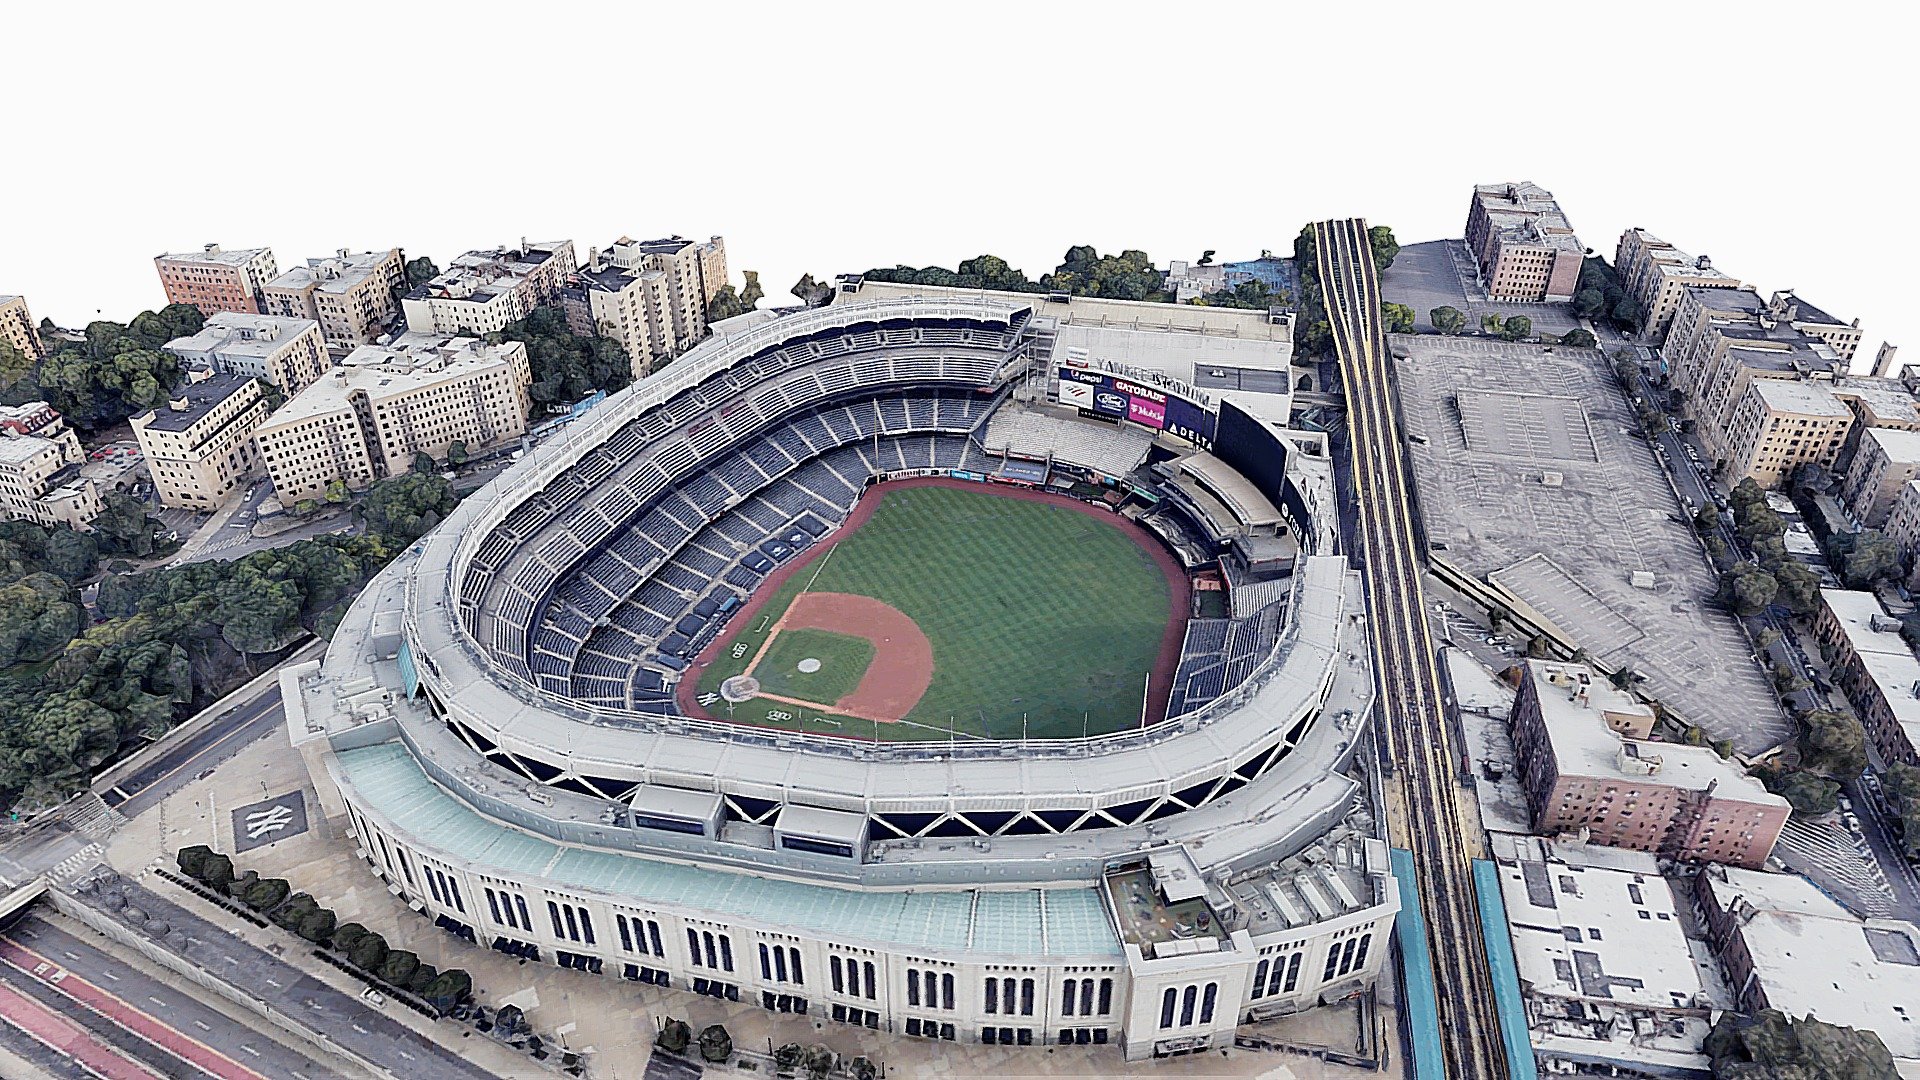 If someone is interested in the model, you can contact me through the following email potorro44@hotmail.com

Stadium is a baseball park located in Concourse, Bronx, New York City. It is the home field for the New York Yankees of Major League Baseball (MLB) and New York City FC of Major League Soccer (MLS), as well as being the host stadium for the annual Pinstripe Bowl game. The $2.3 billion stadium, built with $1.2 billion in public subsidies,[7] replaced the original Yankee Stadium in 2009 and is the second-largest stadium in MLB by seating capacity. It is located one block north of the original, on the 24-acre (9.7 ha) former site of Macombs Dam Park; the 8-acre (3.2 ha) site of the original stadium is now a public park called Heritage Field.

https://en.wikipedia.org/wiki/Yankee_Stadium - Yankee Stadium - 3D model by SENSIET (@asensio) 3d model